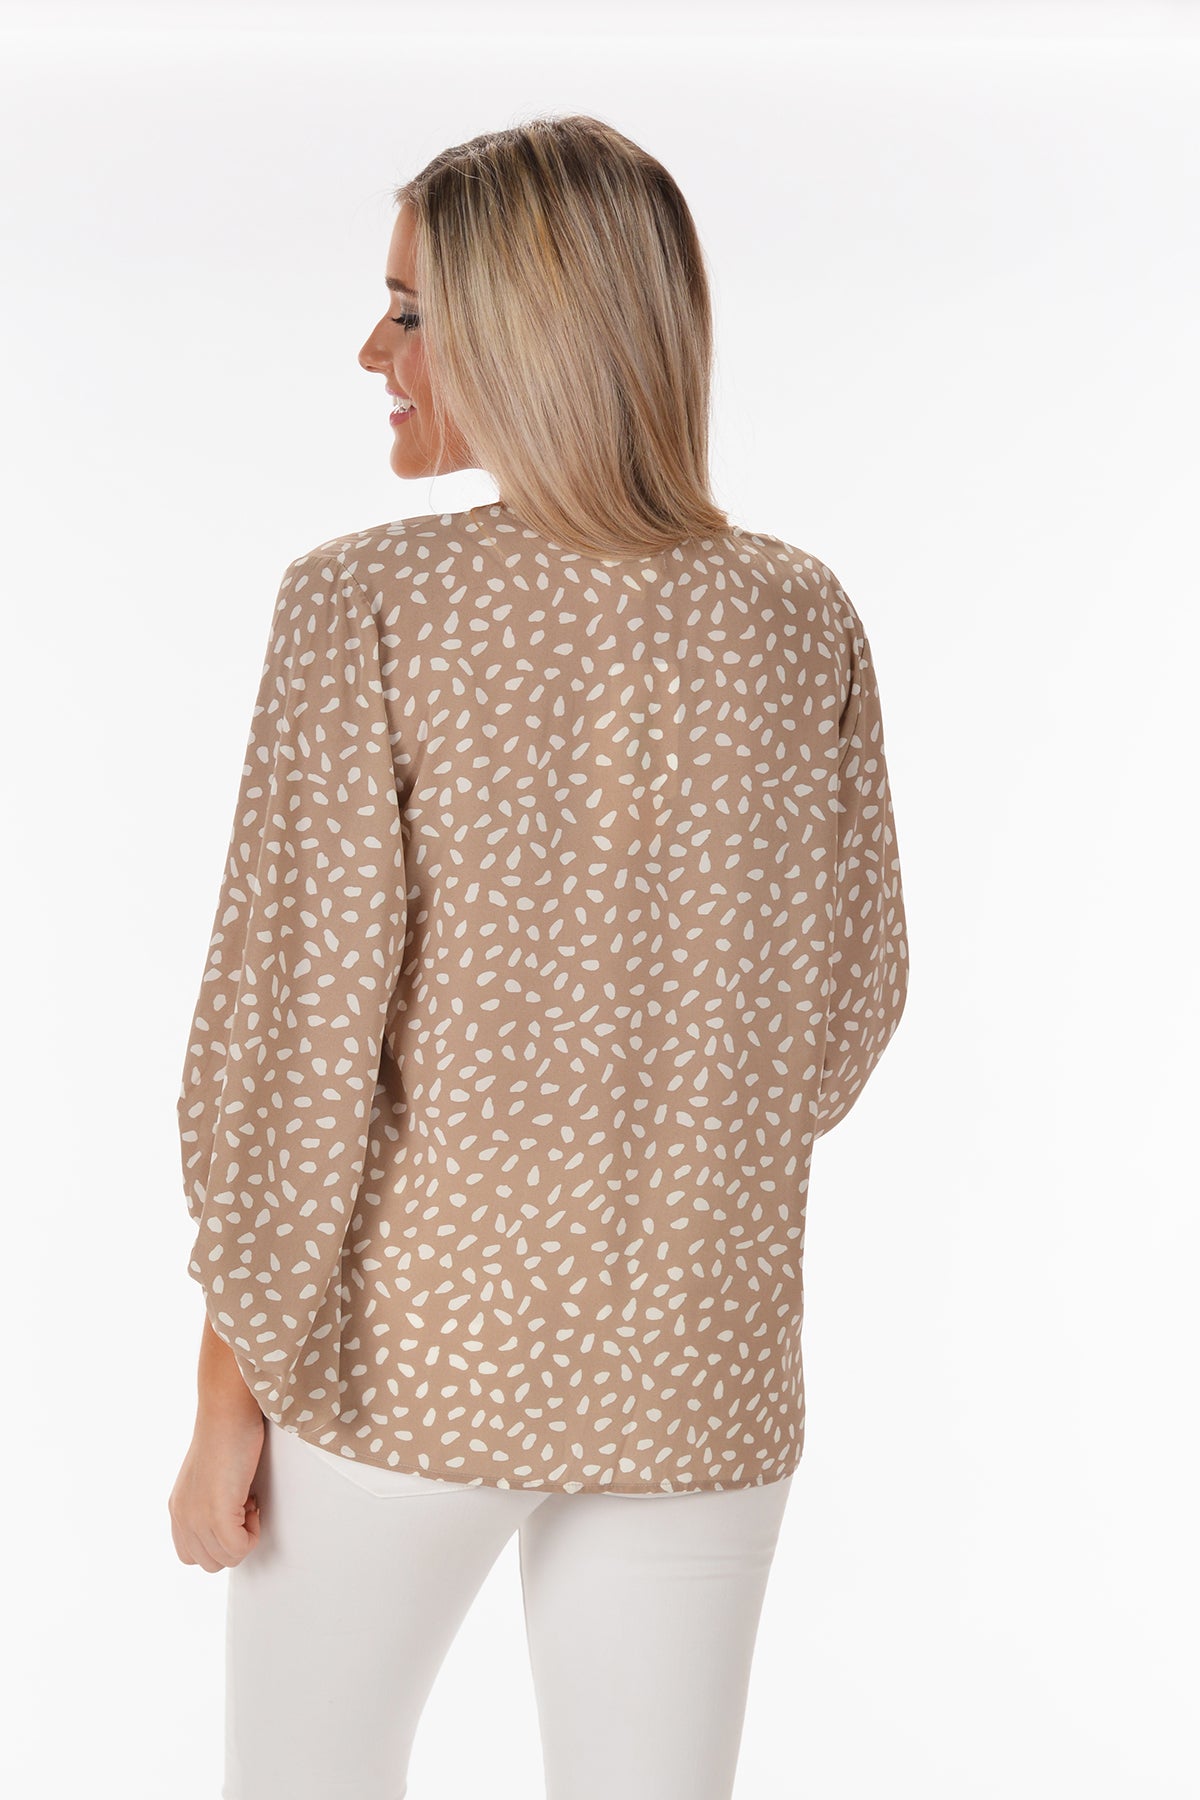 WAITING ON YOUR LOVE TOP -LATTE - Dear Stella Boutique